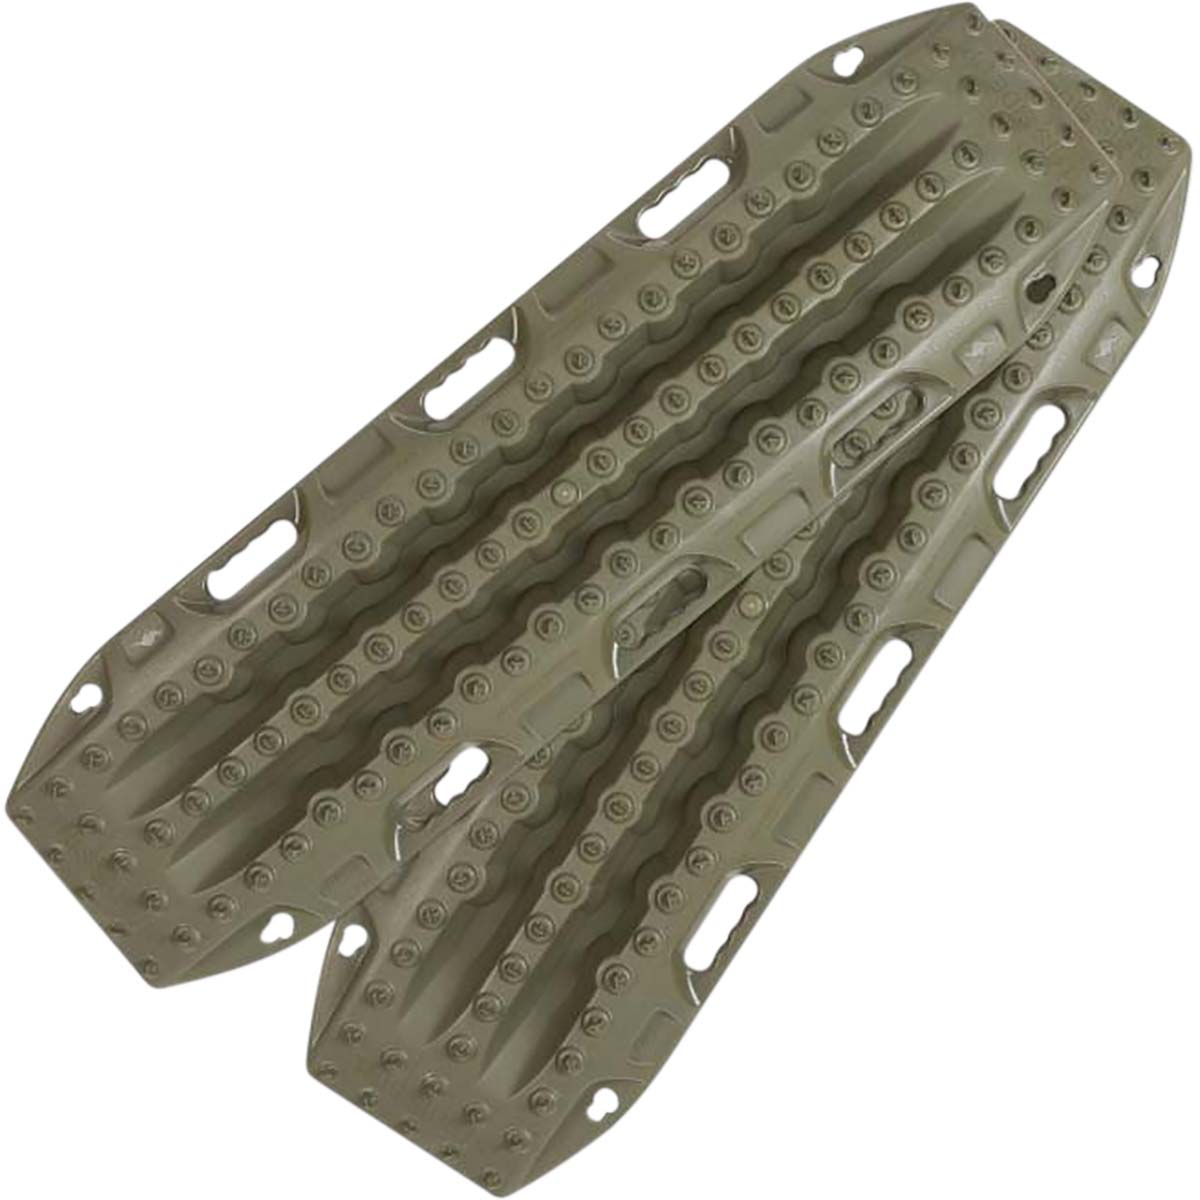 Maxtrax MKII Recovery Boards Olive